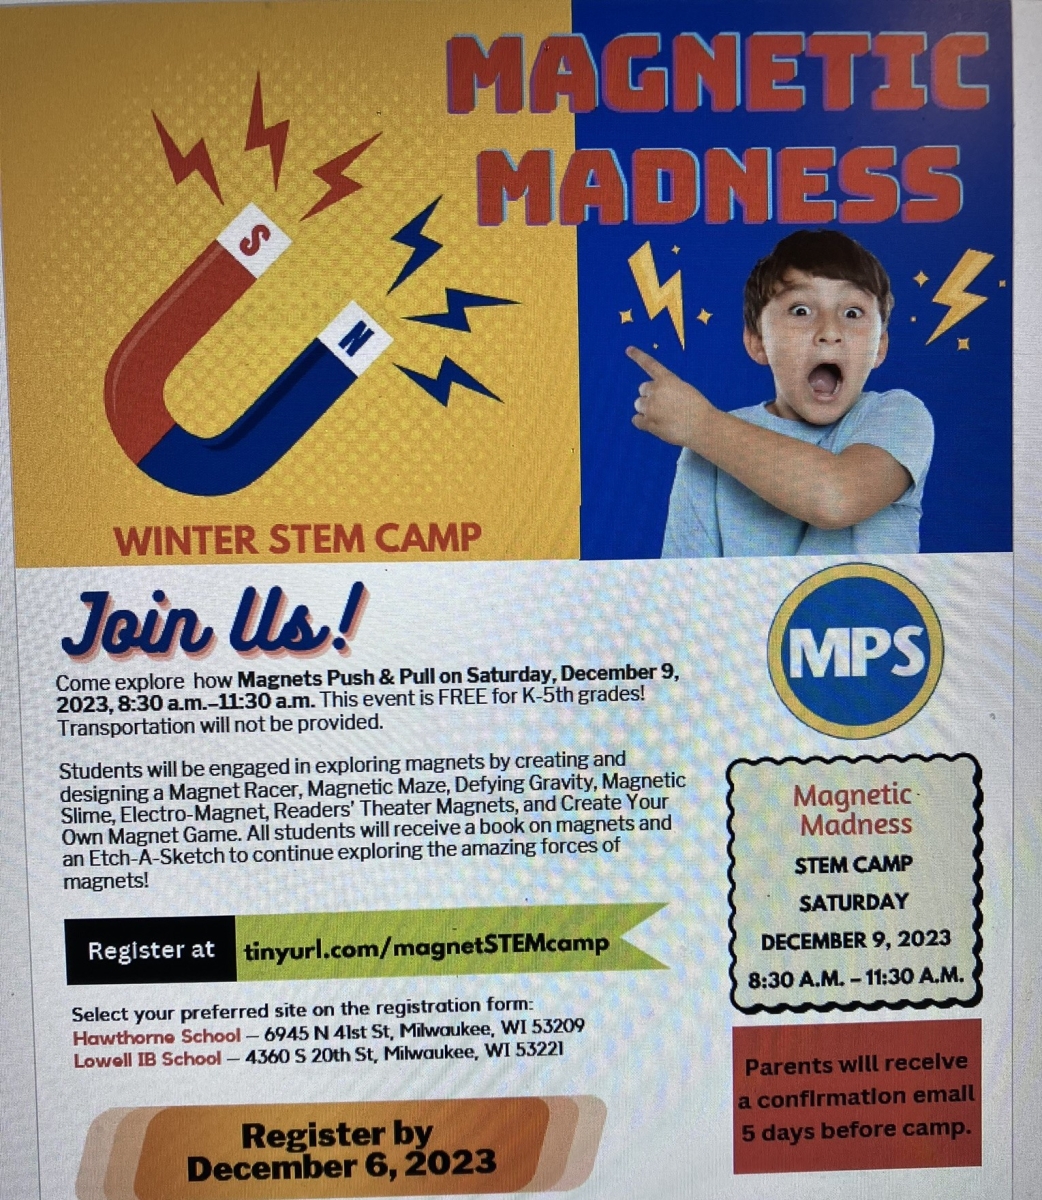 Flyer for a recent STEM camp held in Milwaukee public schools